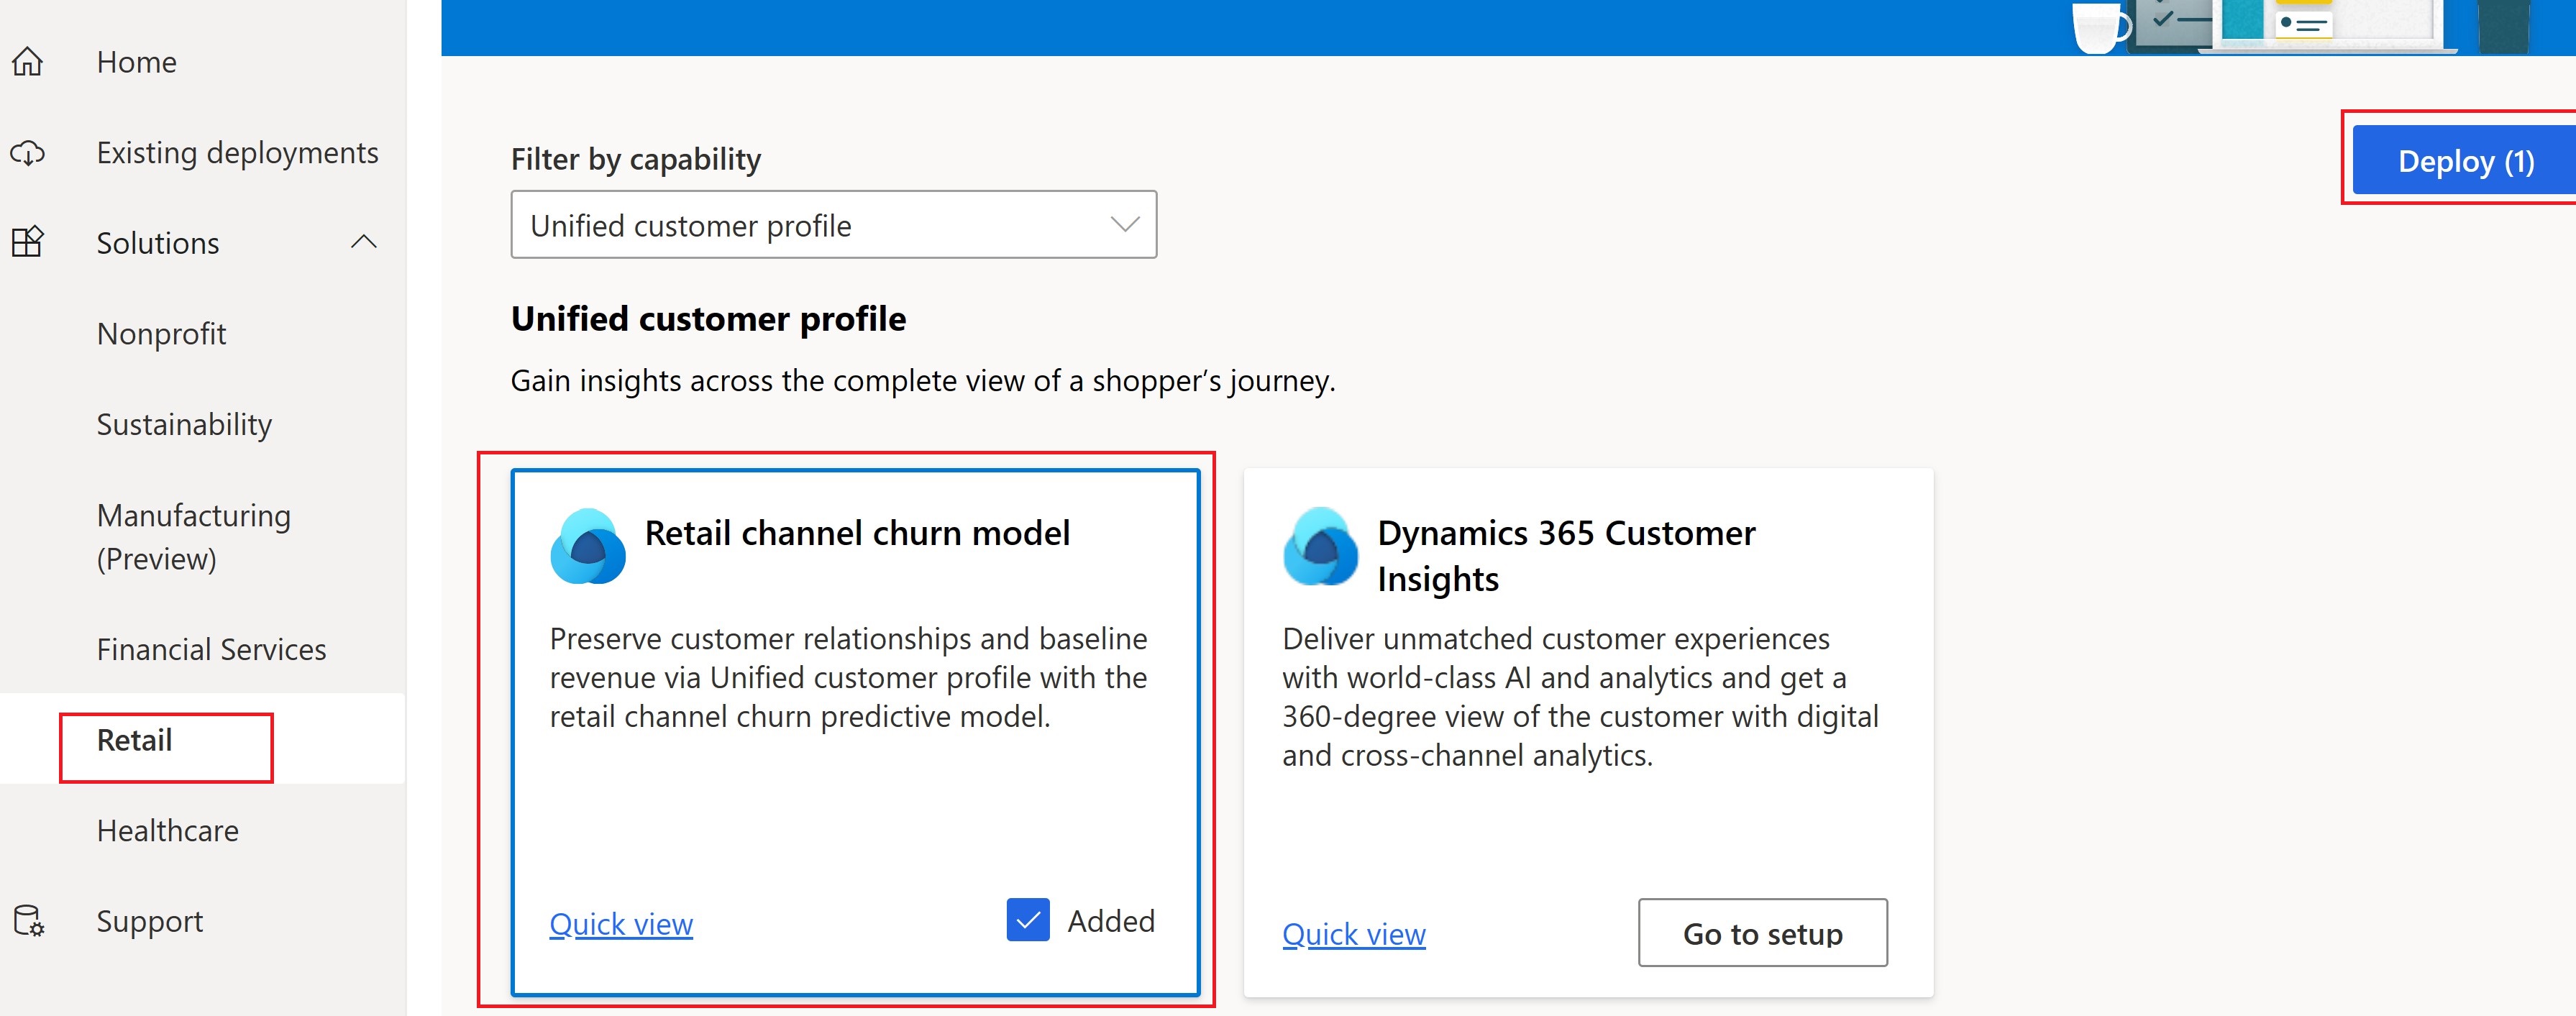 Add and deploy the Unified customer profile solution.